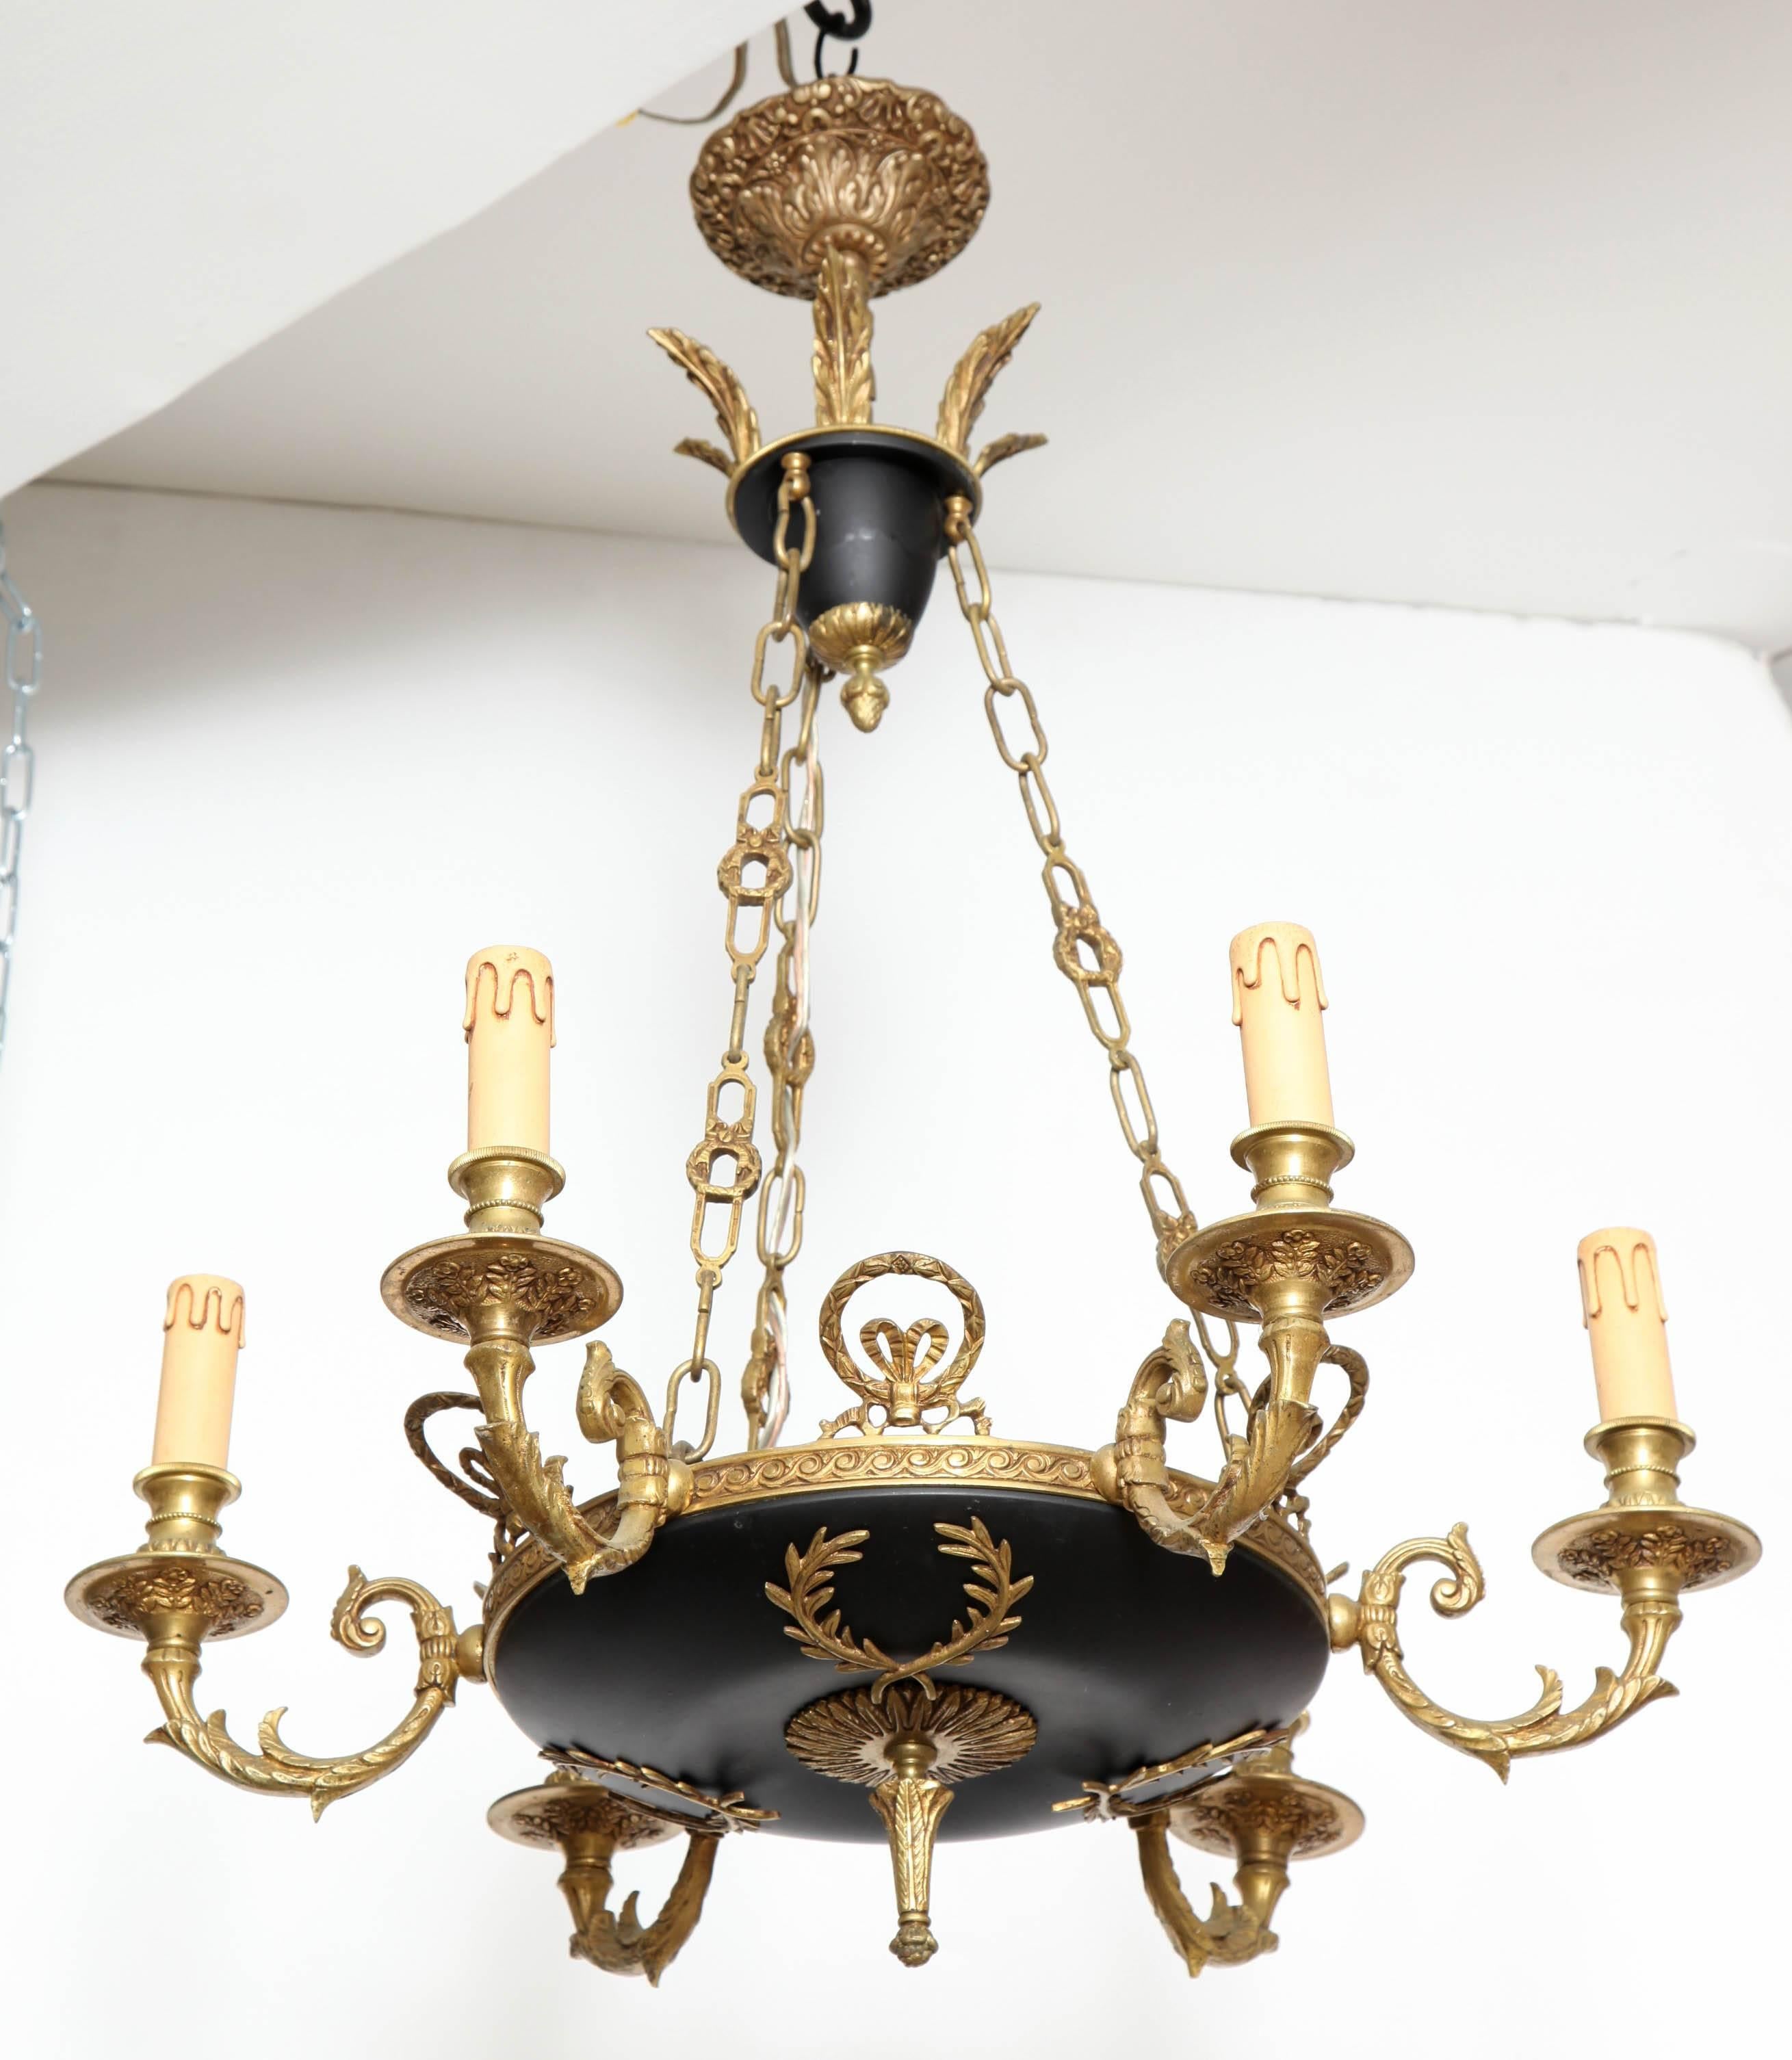 Empire style chandelier in 2 patinated bronze black and faded gold with chain and canopy
6 arms